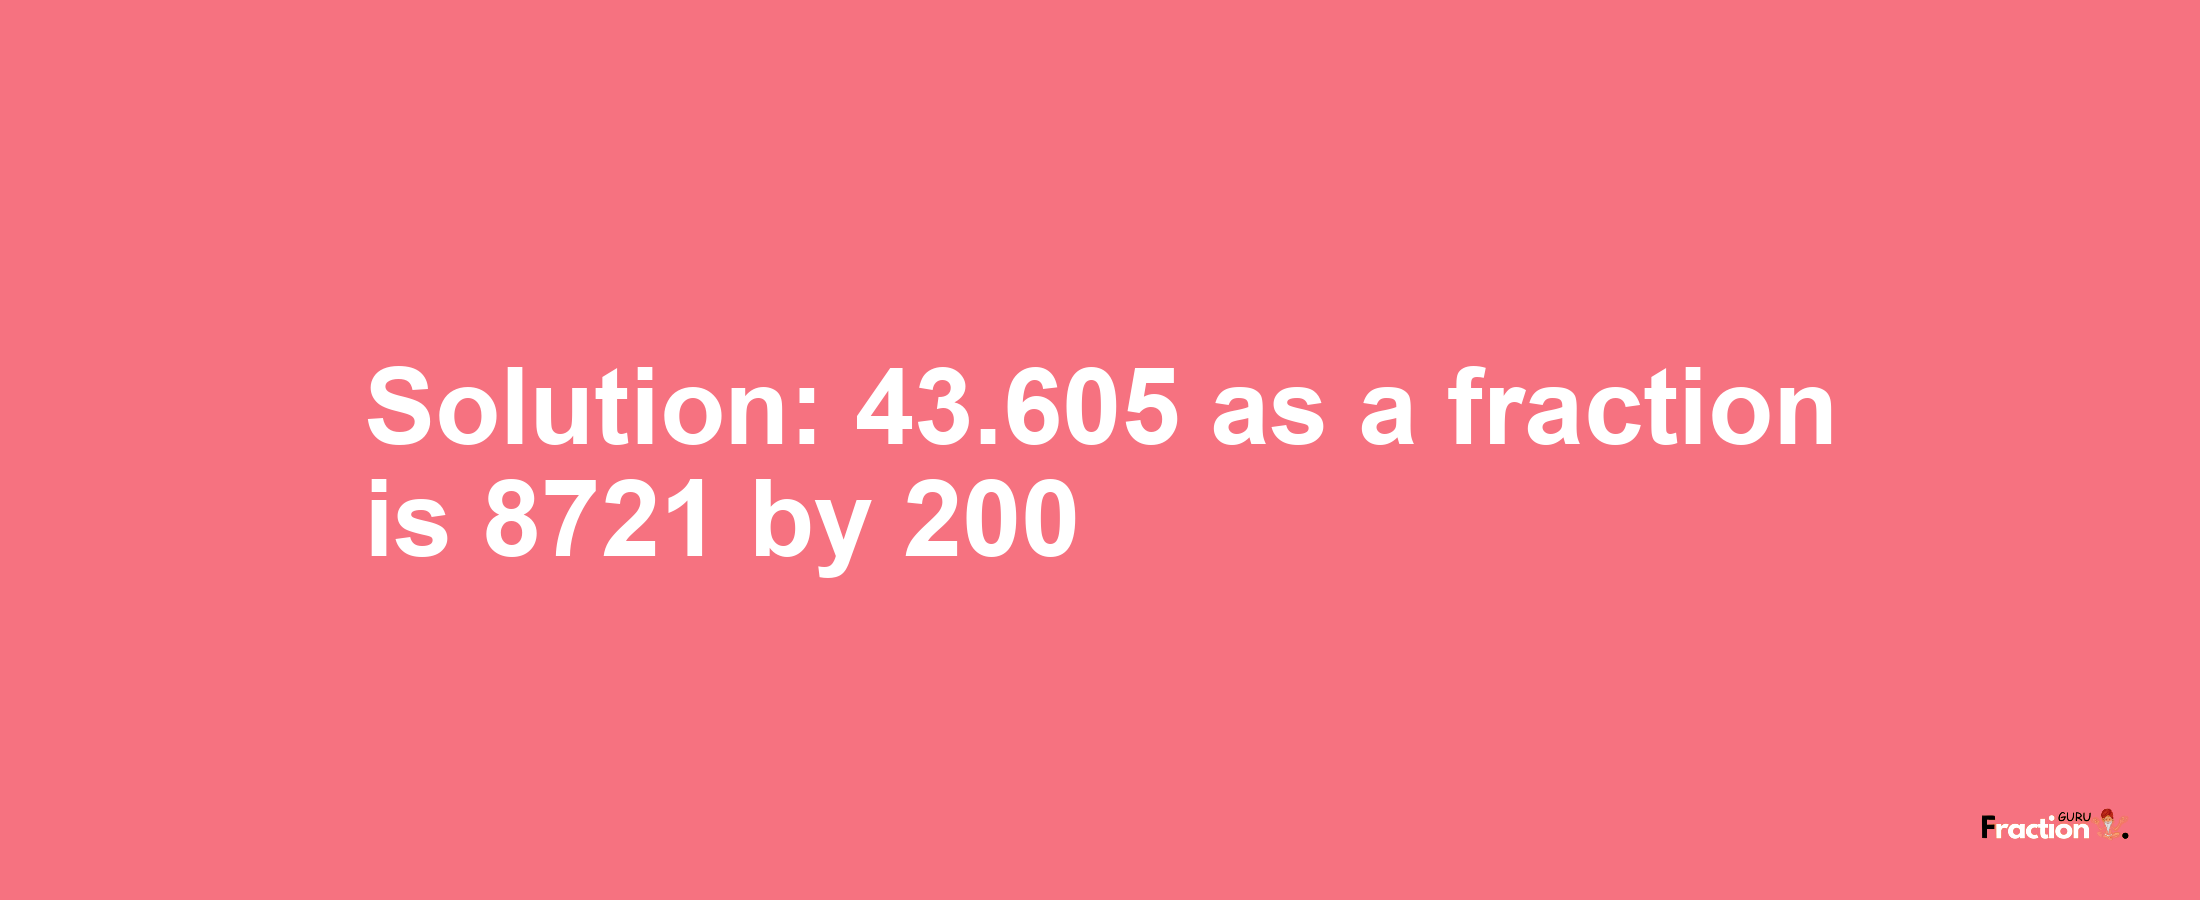 Solution:43.605 as a fraction is 8721/200